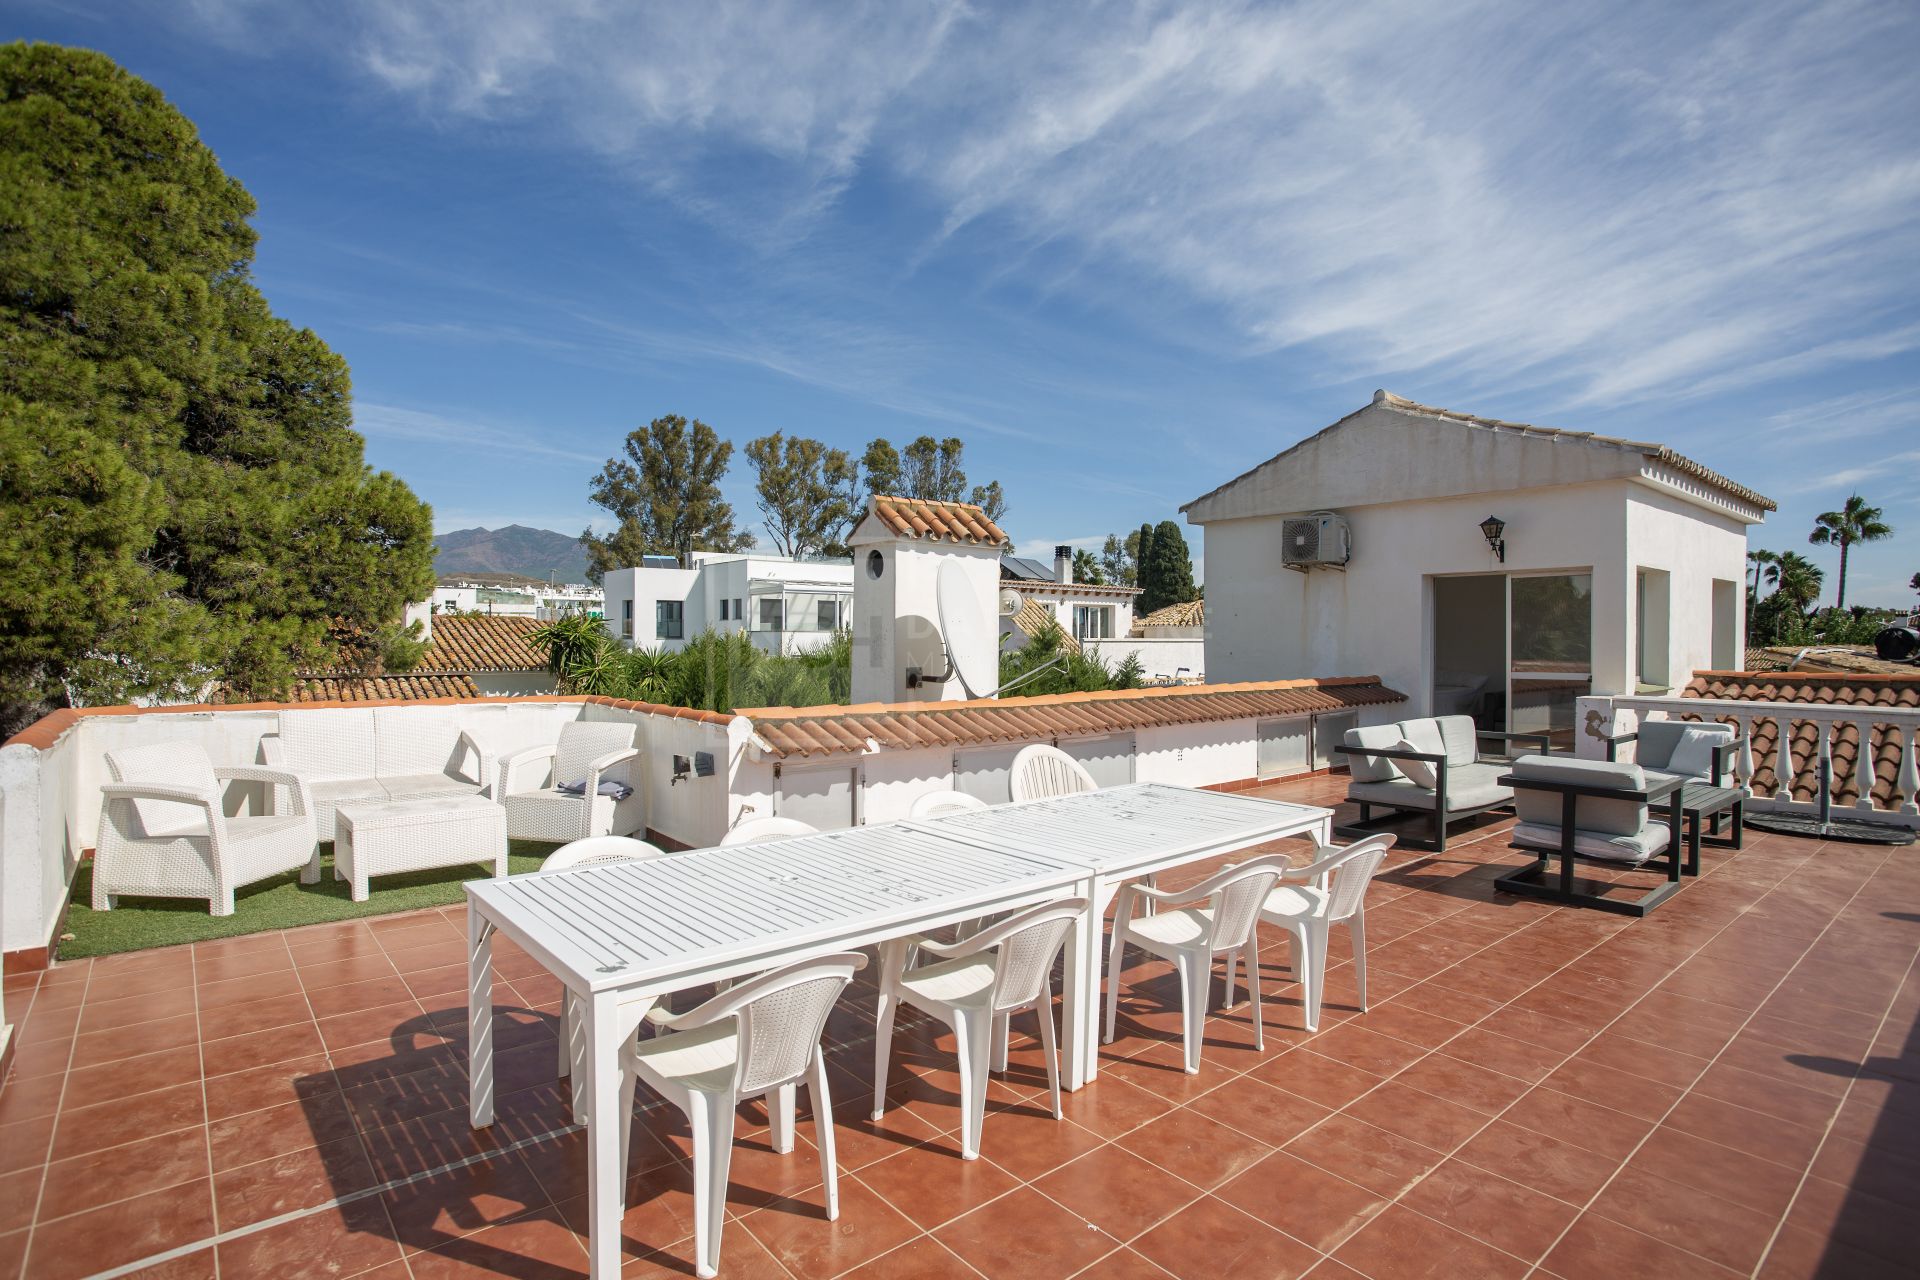 INVESTMENT OPPORTUNITY! 5-BEDROOM VILLA 200 METRES FROM THE BEACH, COSTALITA, ESTEPONA